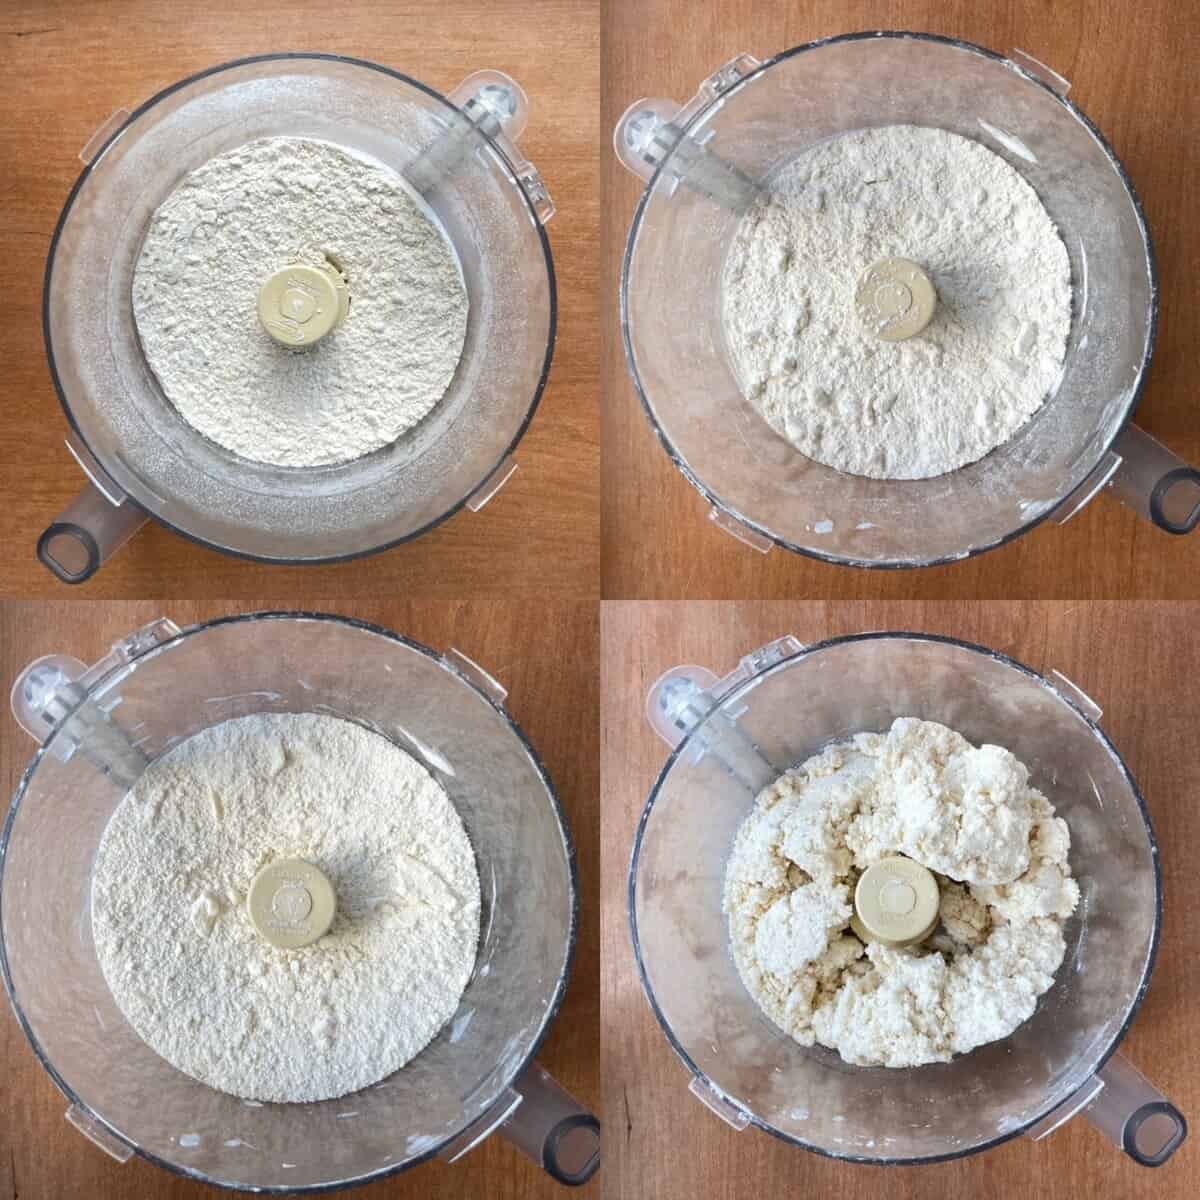 four panels showing pie dough made in a food processor from combining flour, adding cream cheese, butter cubes, and then the final pie dough clumped together.